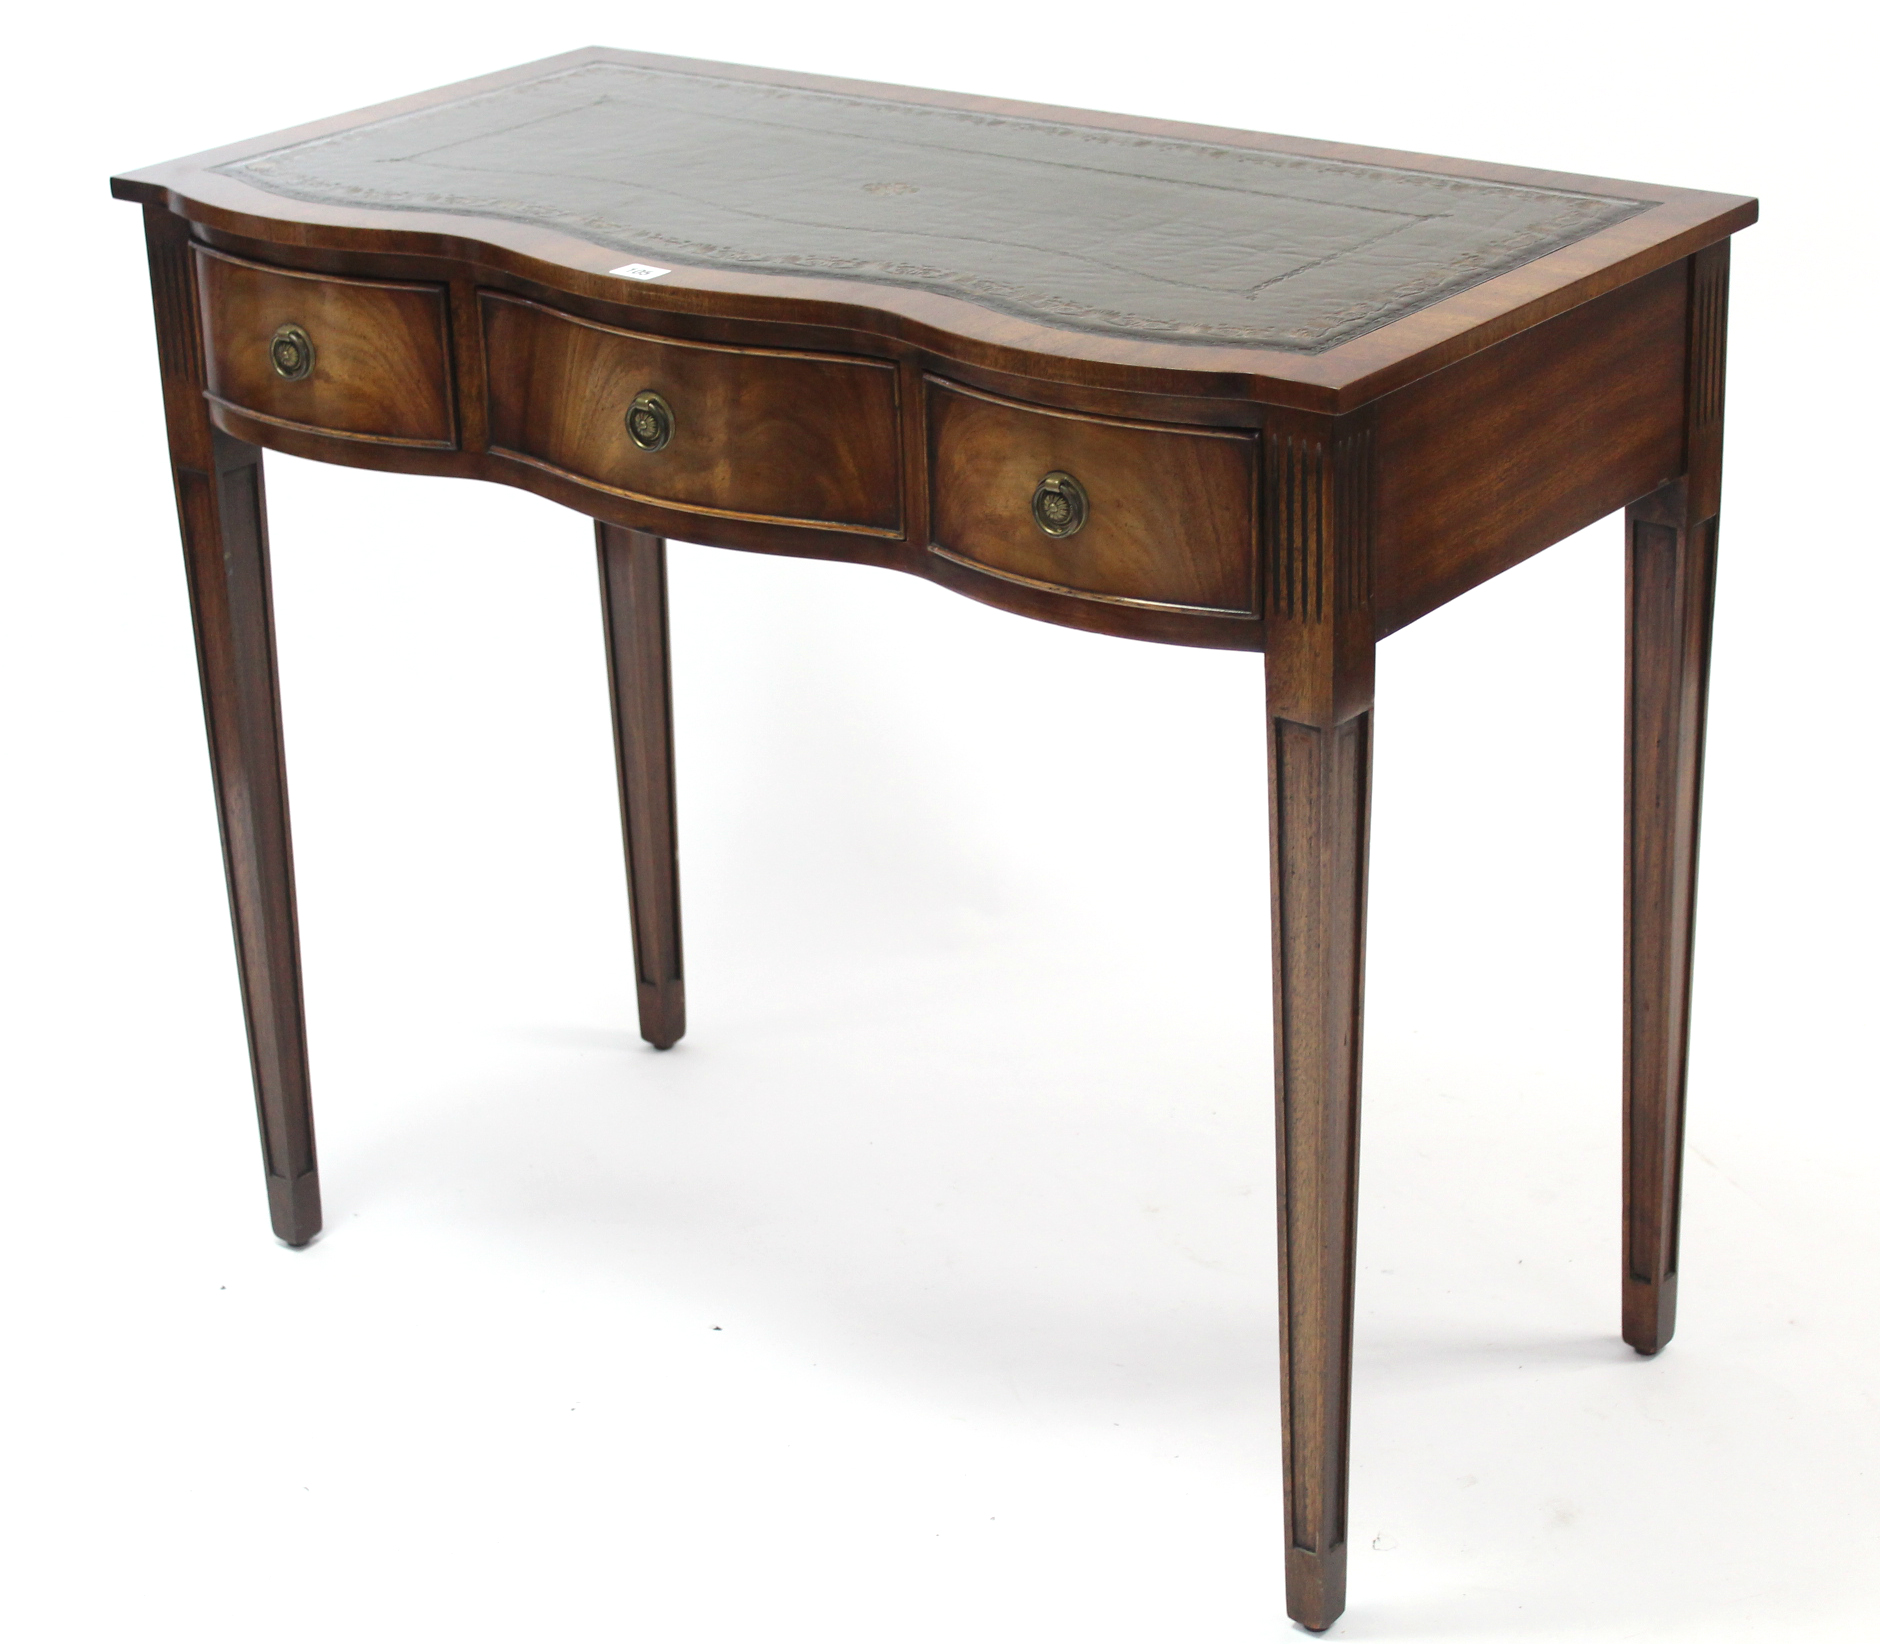 A reproduction mahogany serpentine-front writing table inset gilt-tooled green leather cloth, fitted